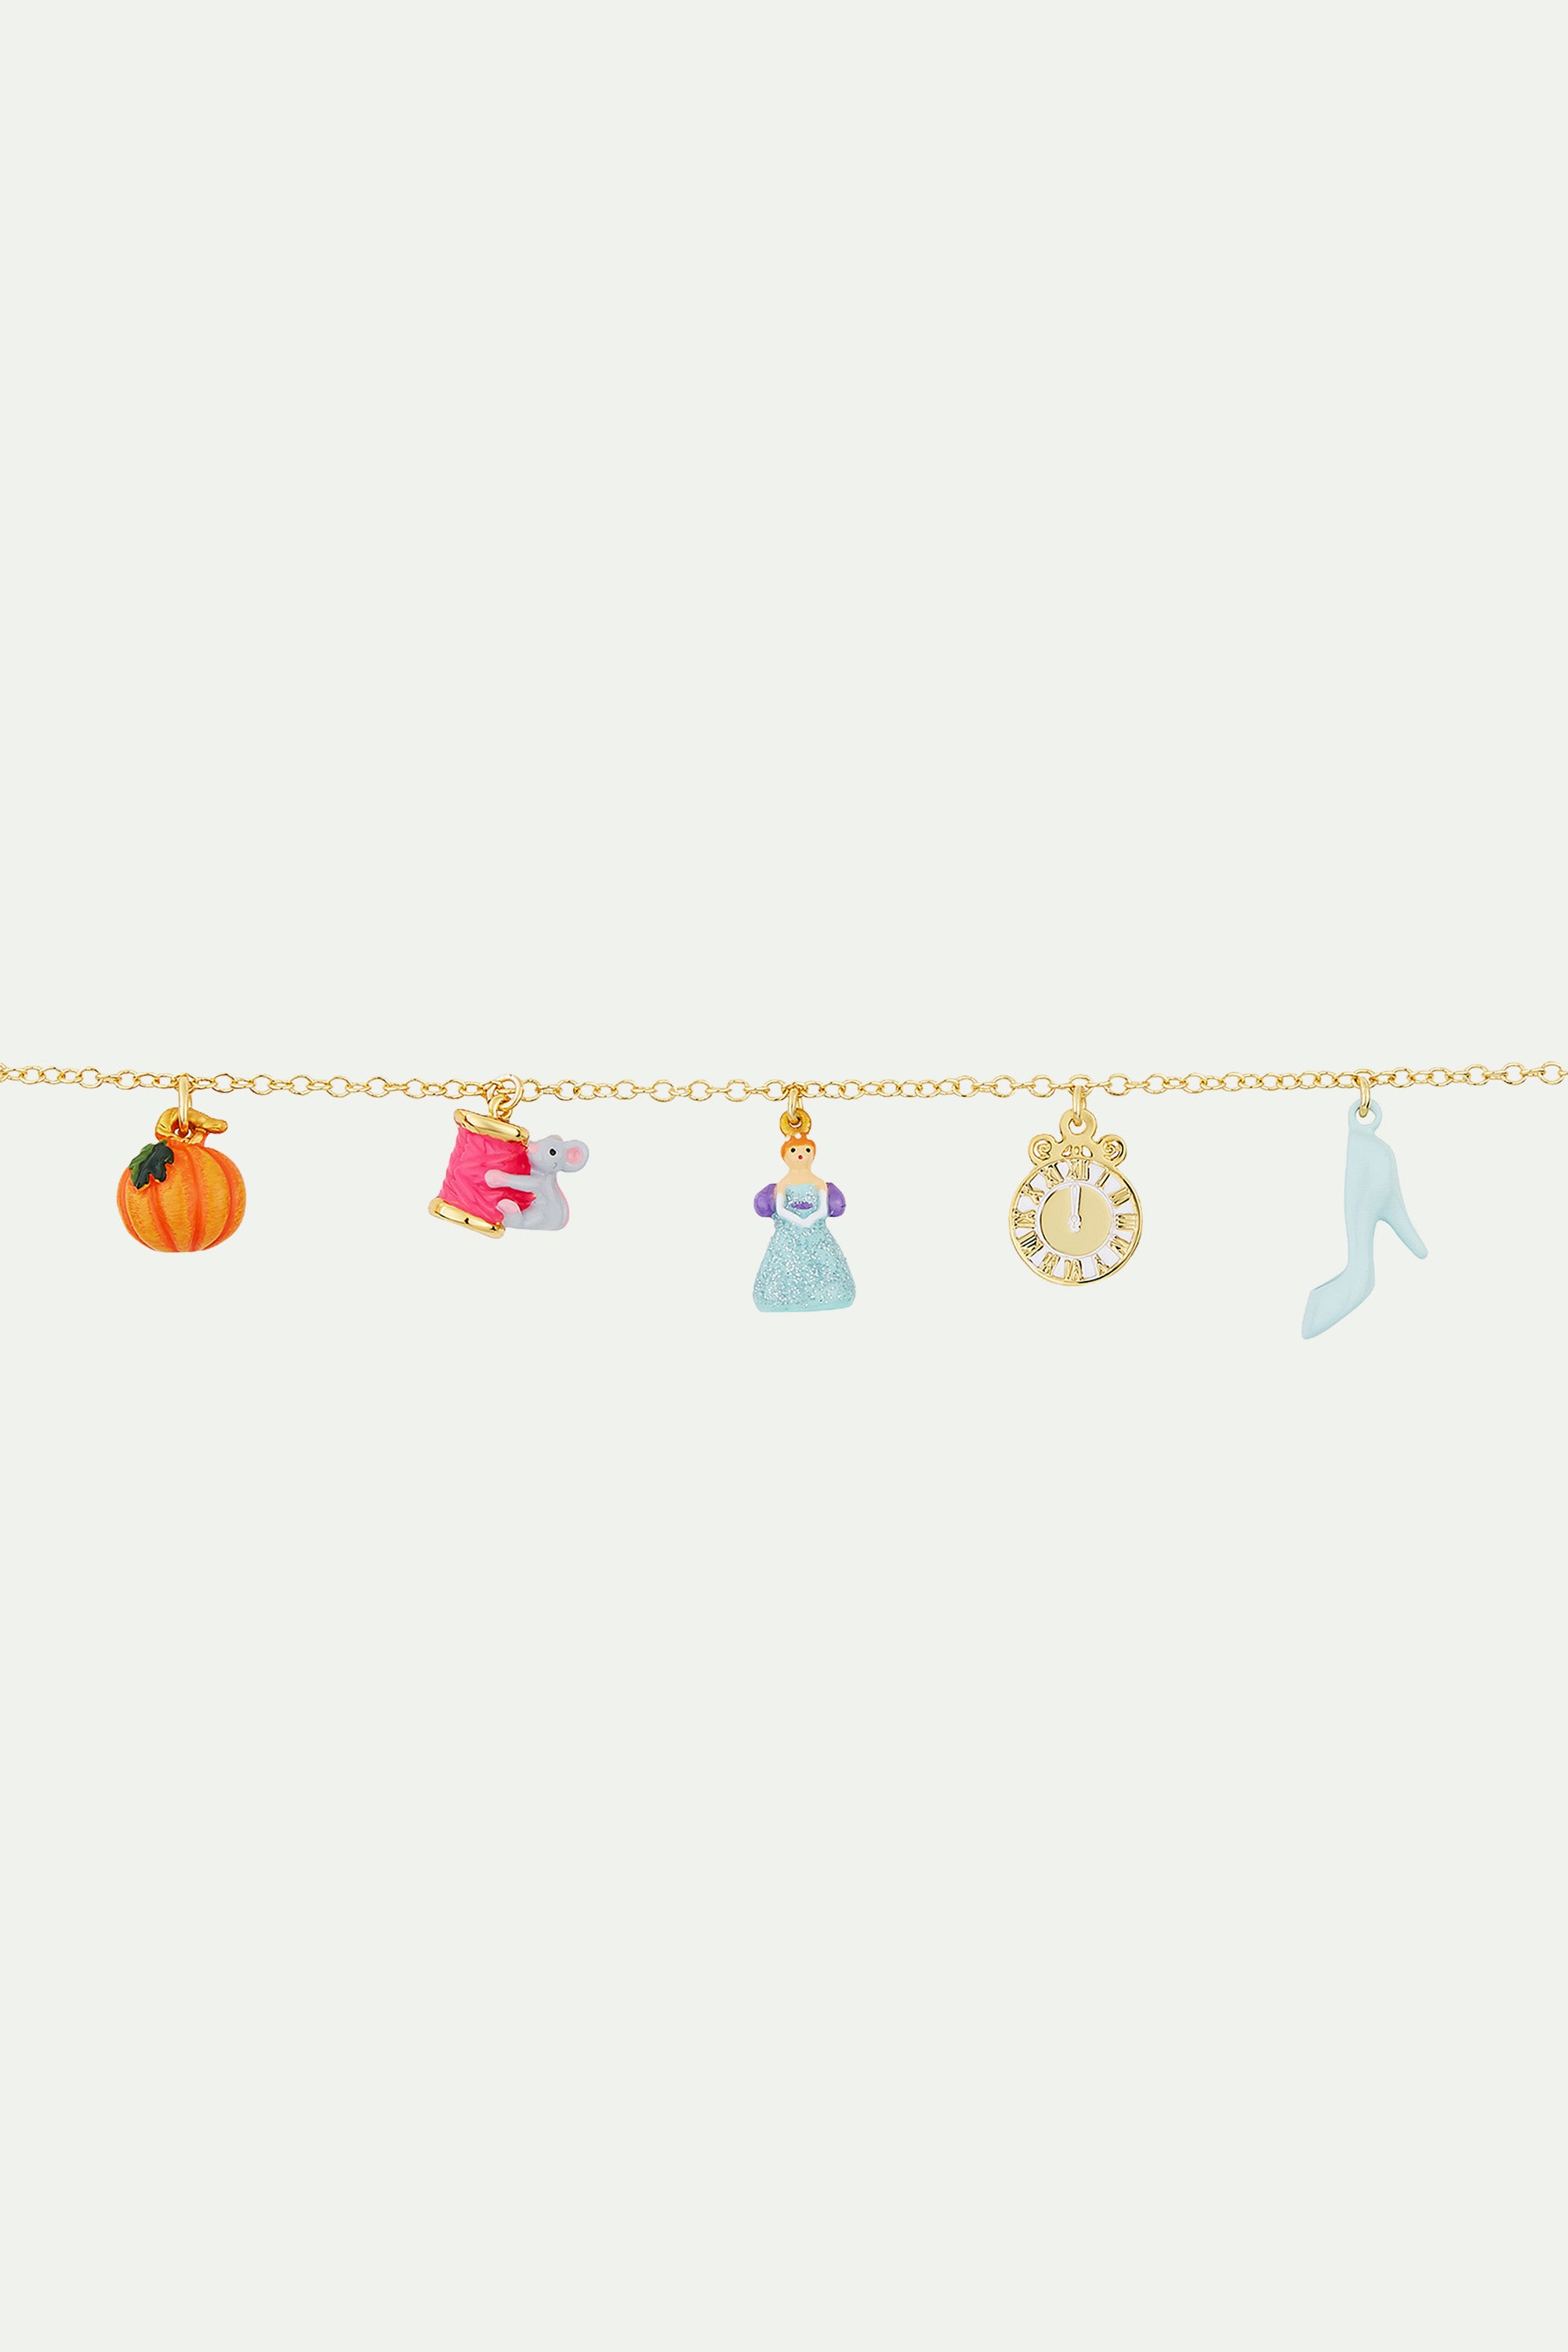 Pumpkin, Spool of Thread and Mouse, Cinderella, Clock and Slipper charm bracelet